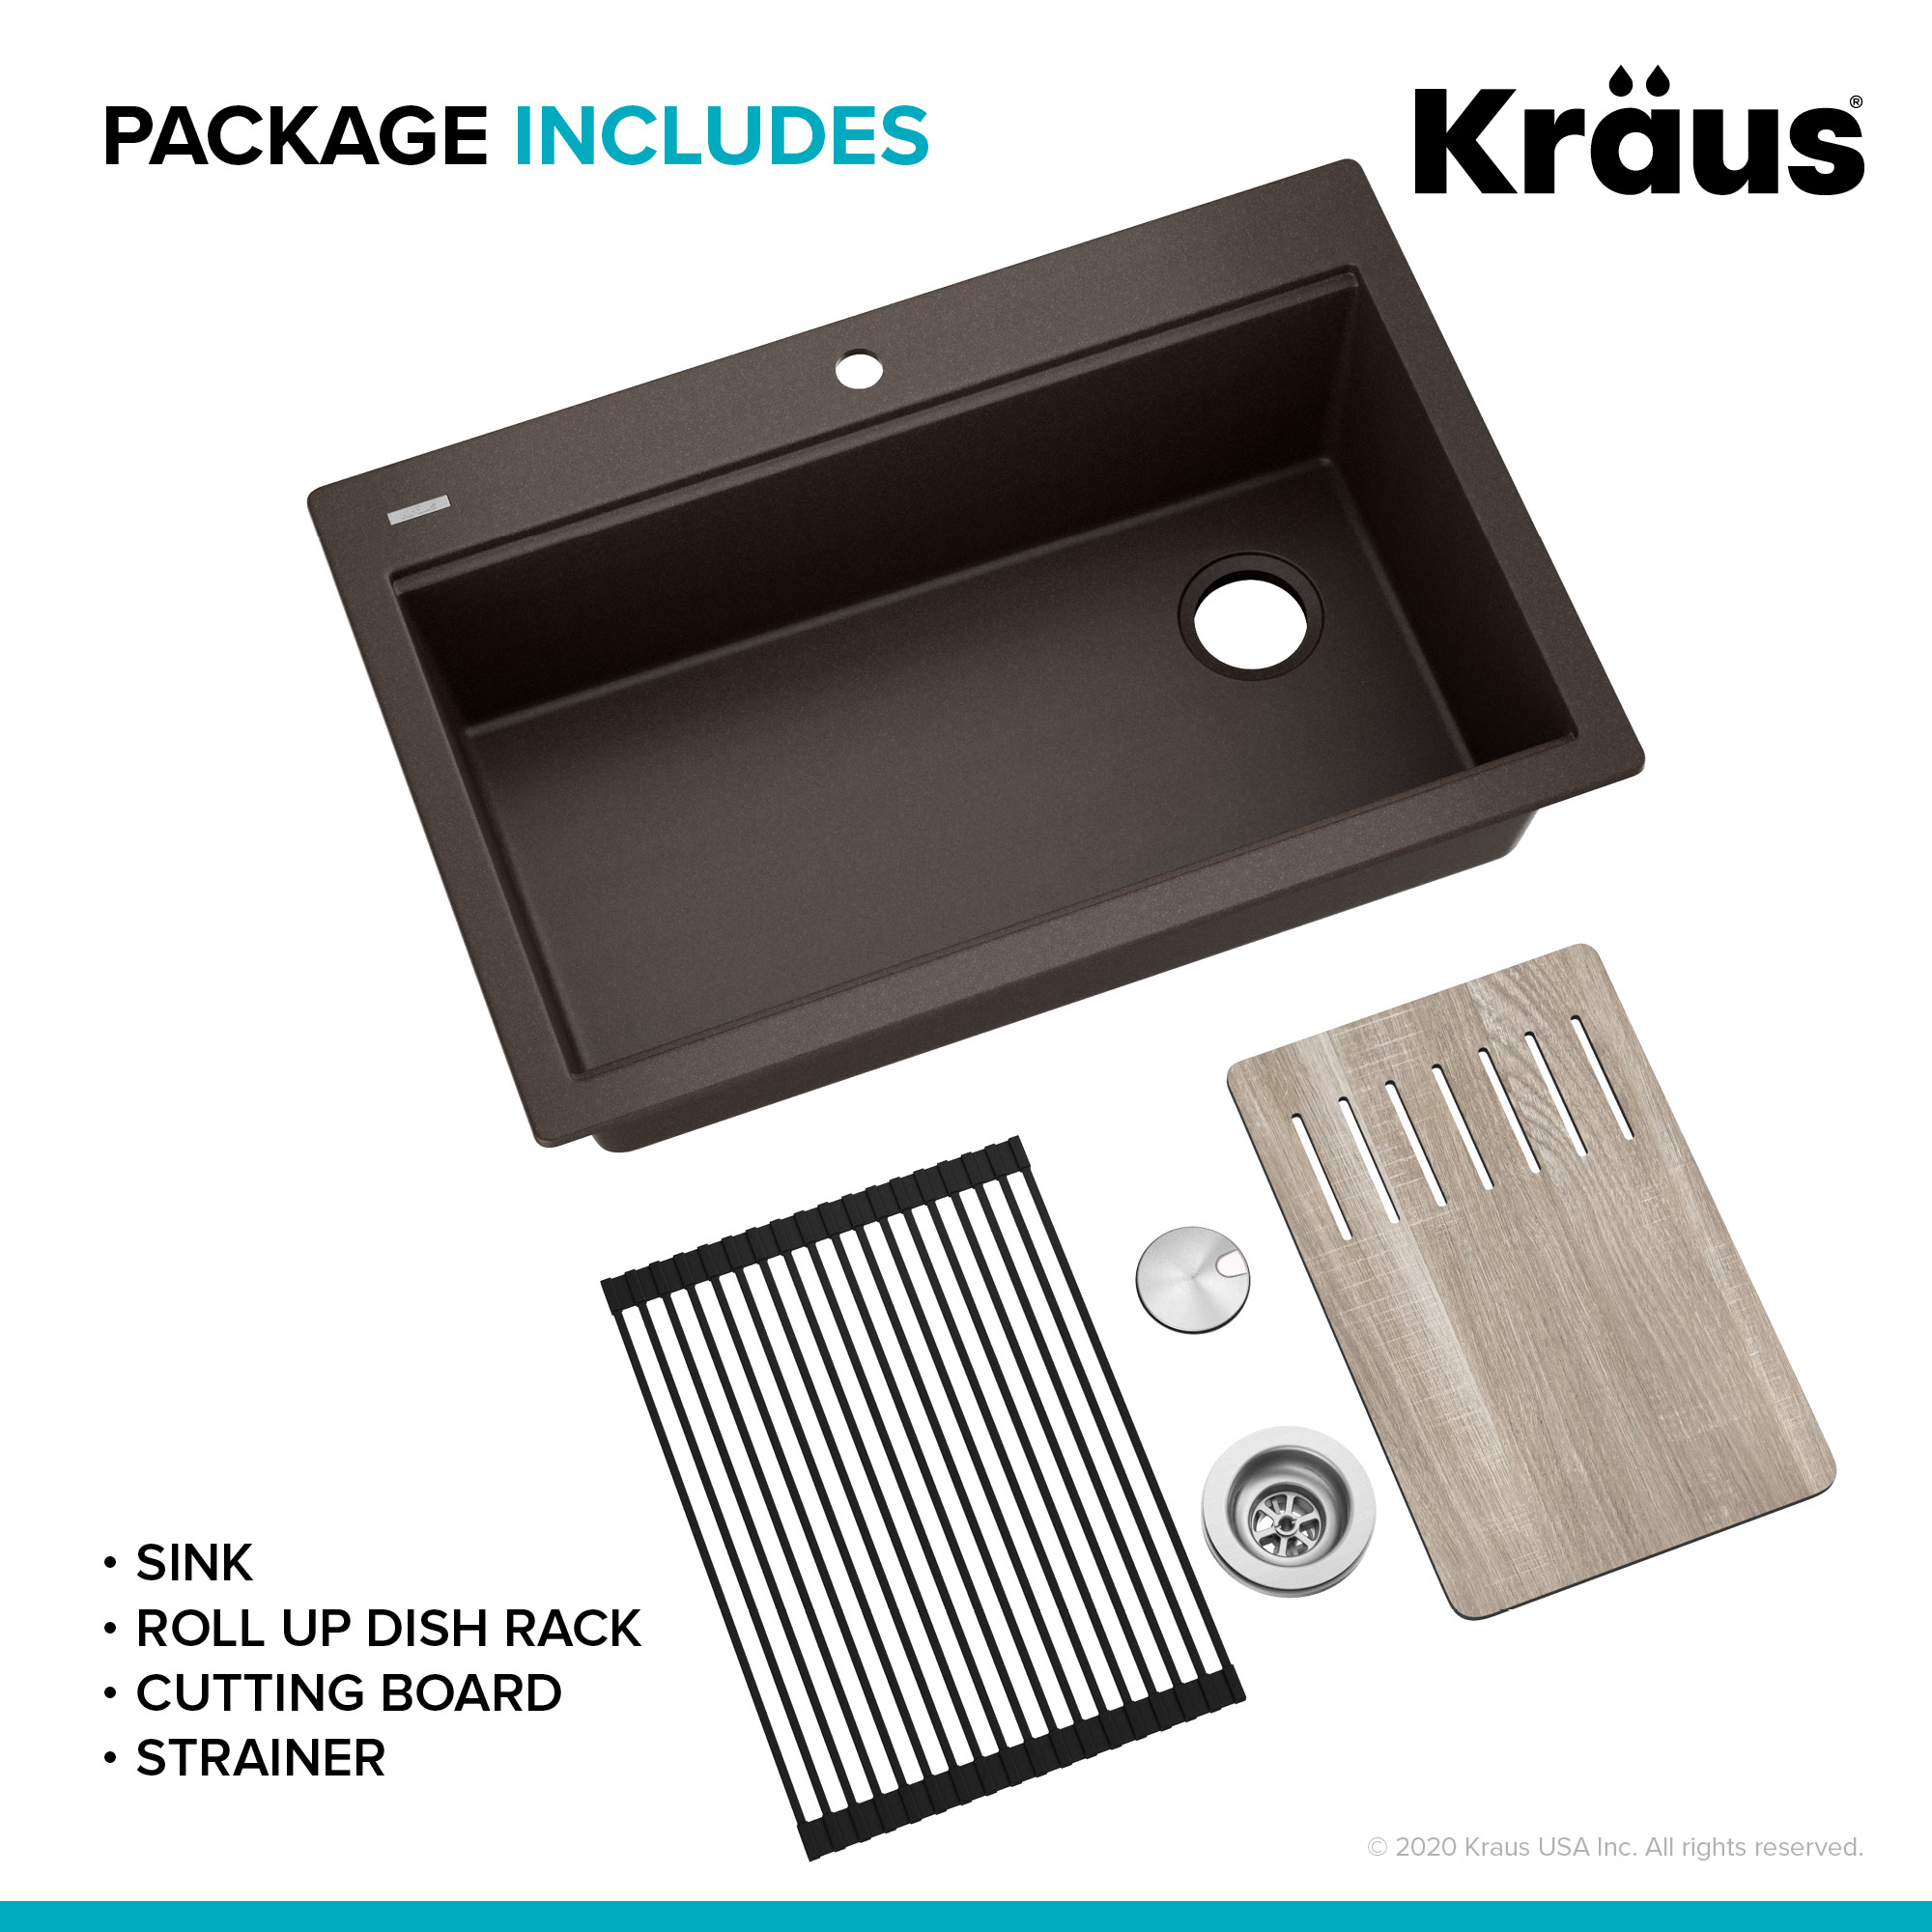 Kraus Bellucci Workstation 33 inch Drop-In Granite Composite Single Bowl Kitchen Sink in Metallic Brown with Accessories - image 4 of 13